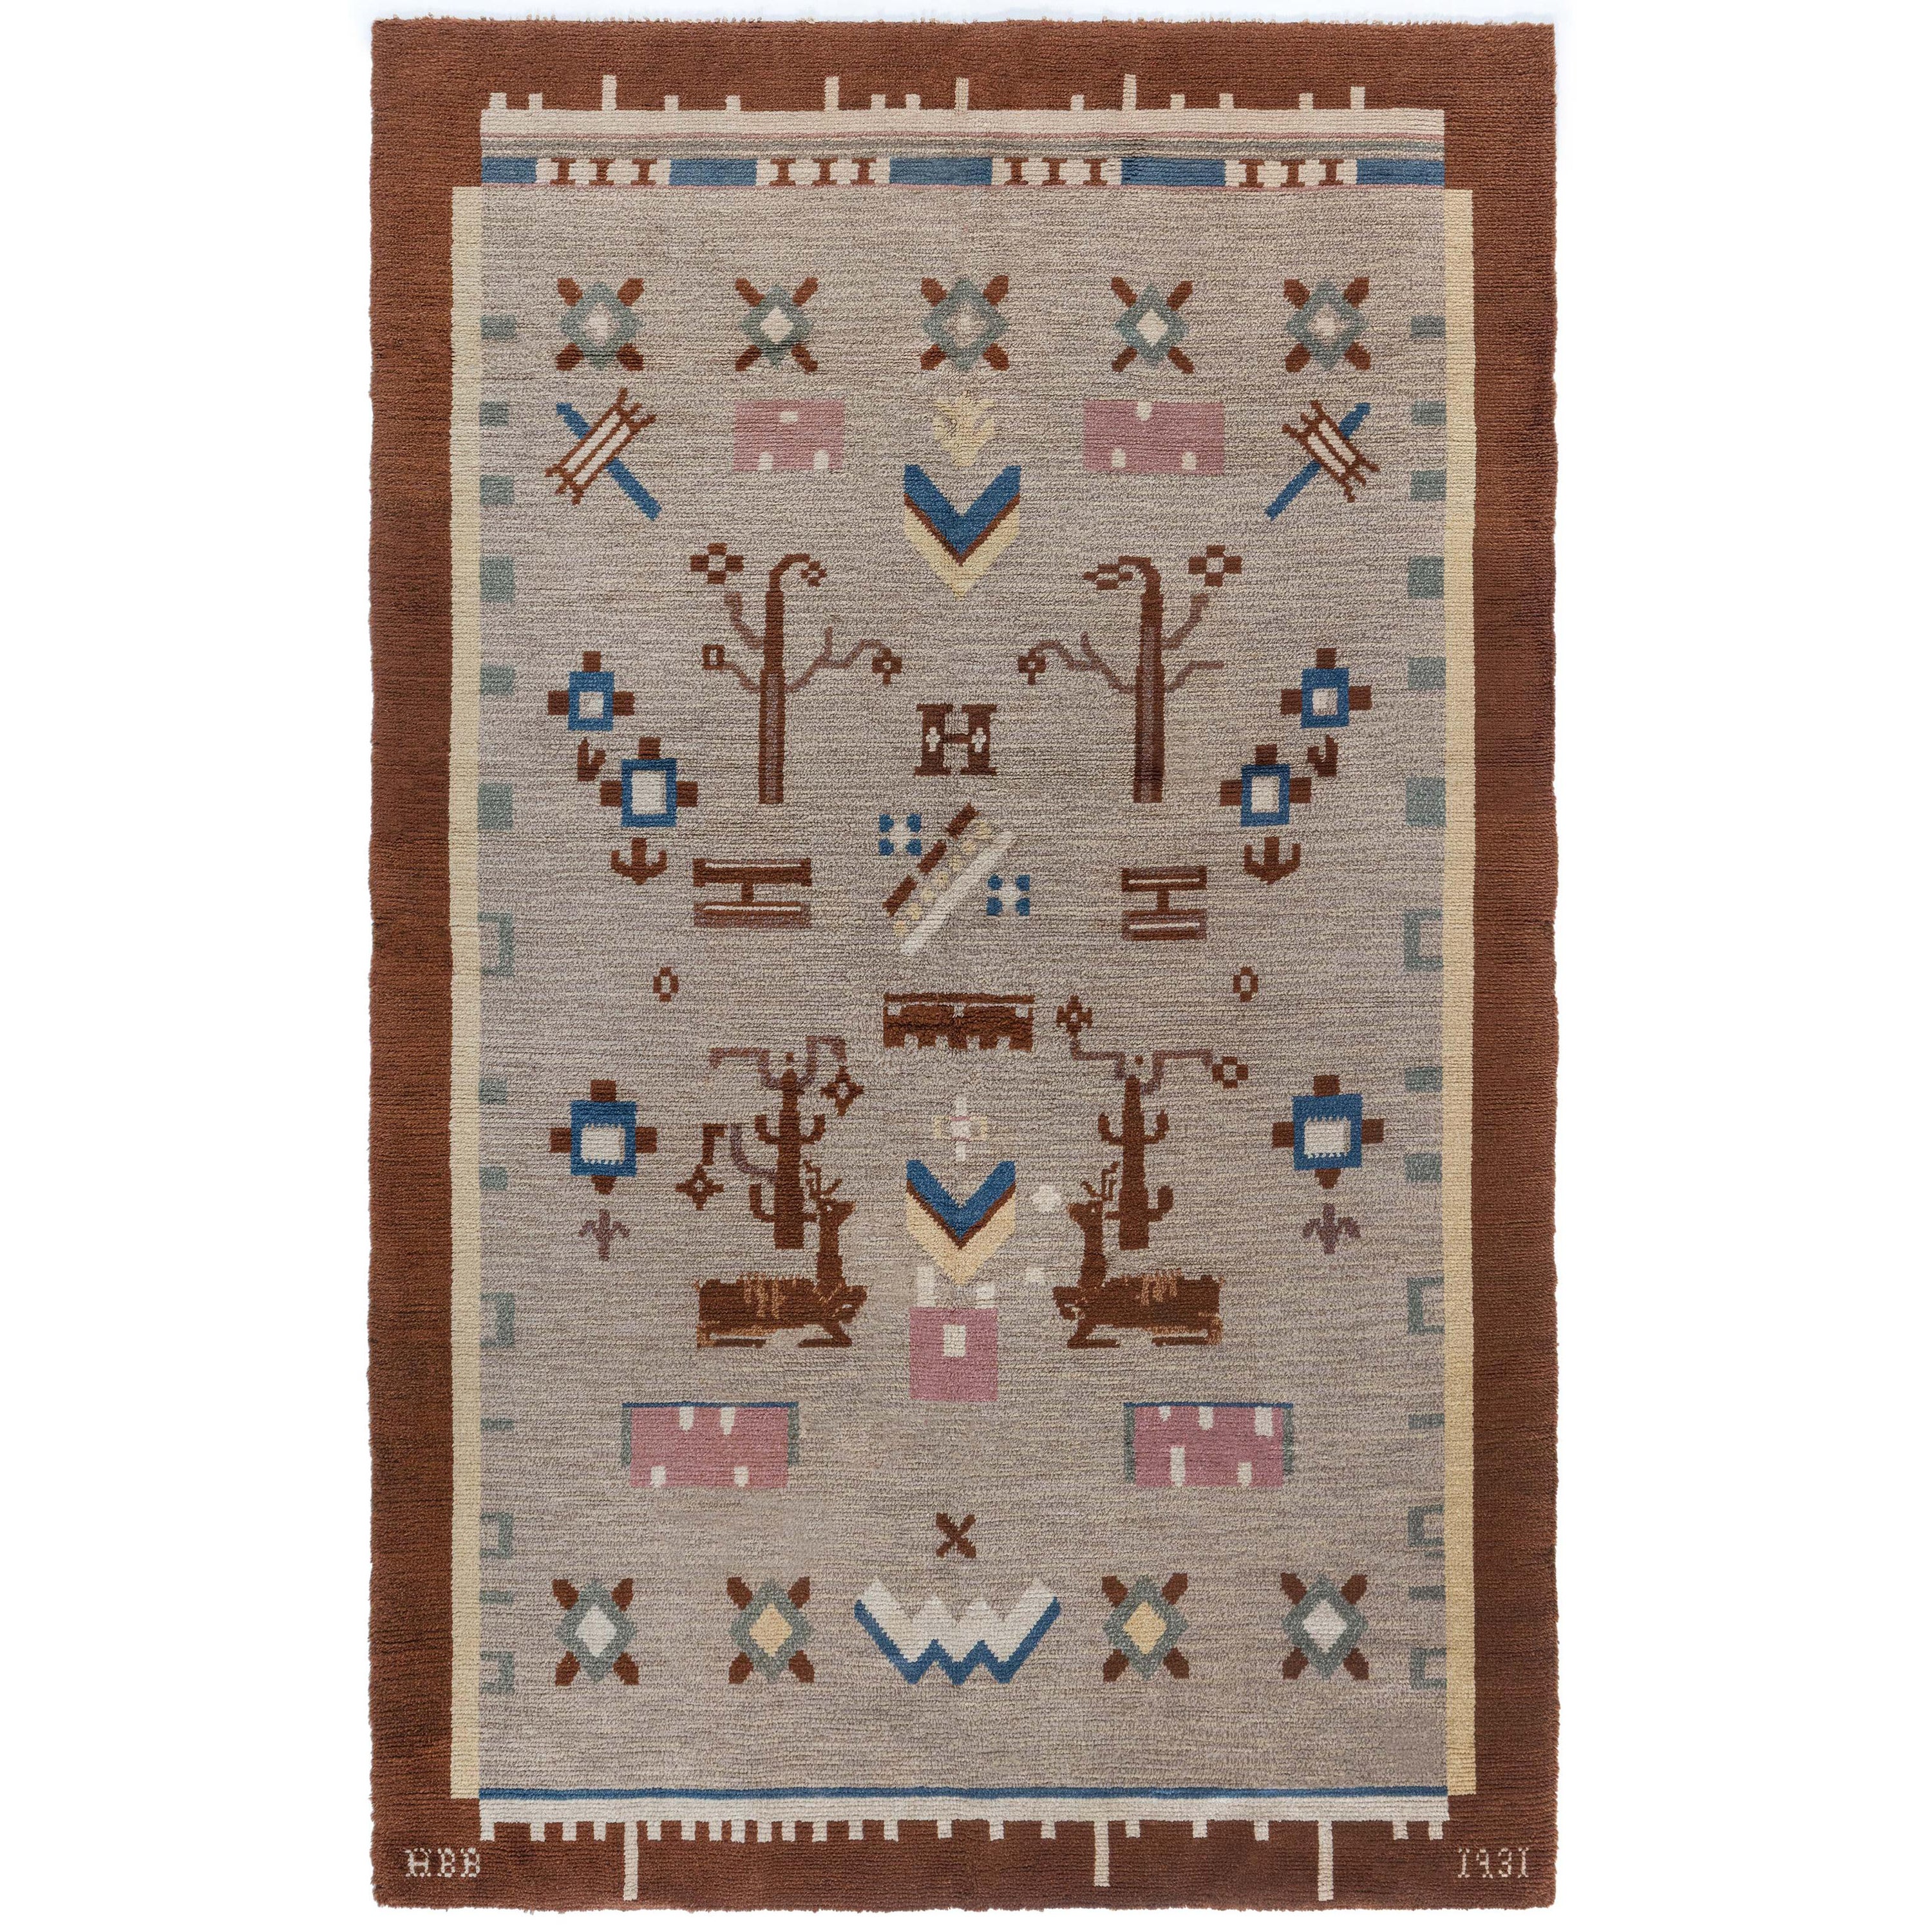 Mid-20th Century Swedish Pile Rug Sign Initials 'HBB' For Sale